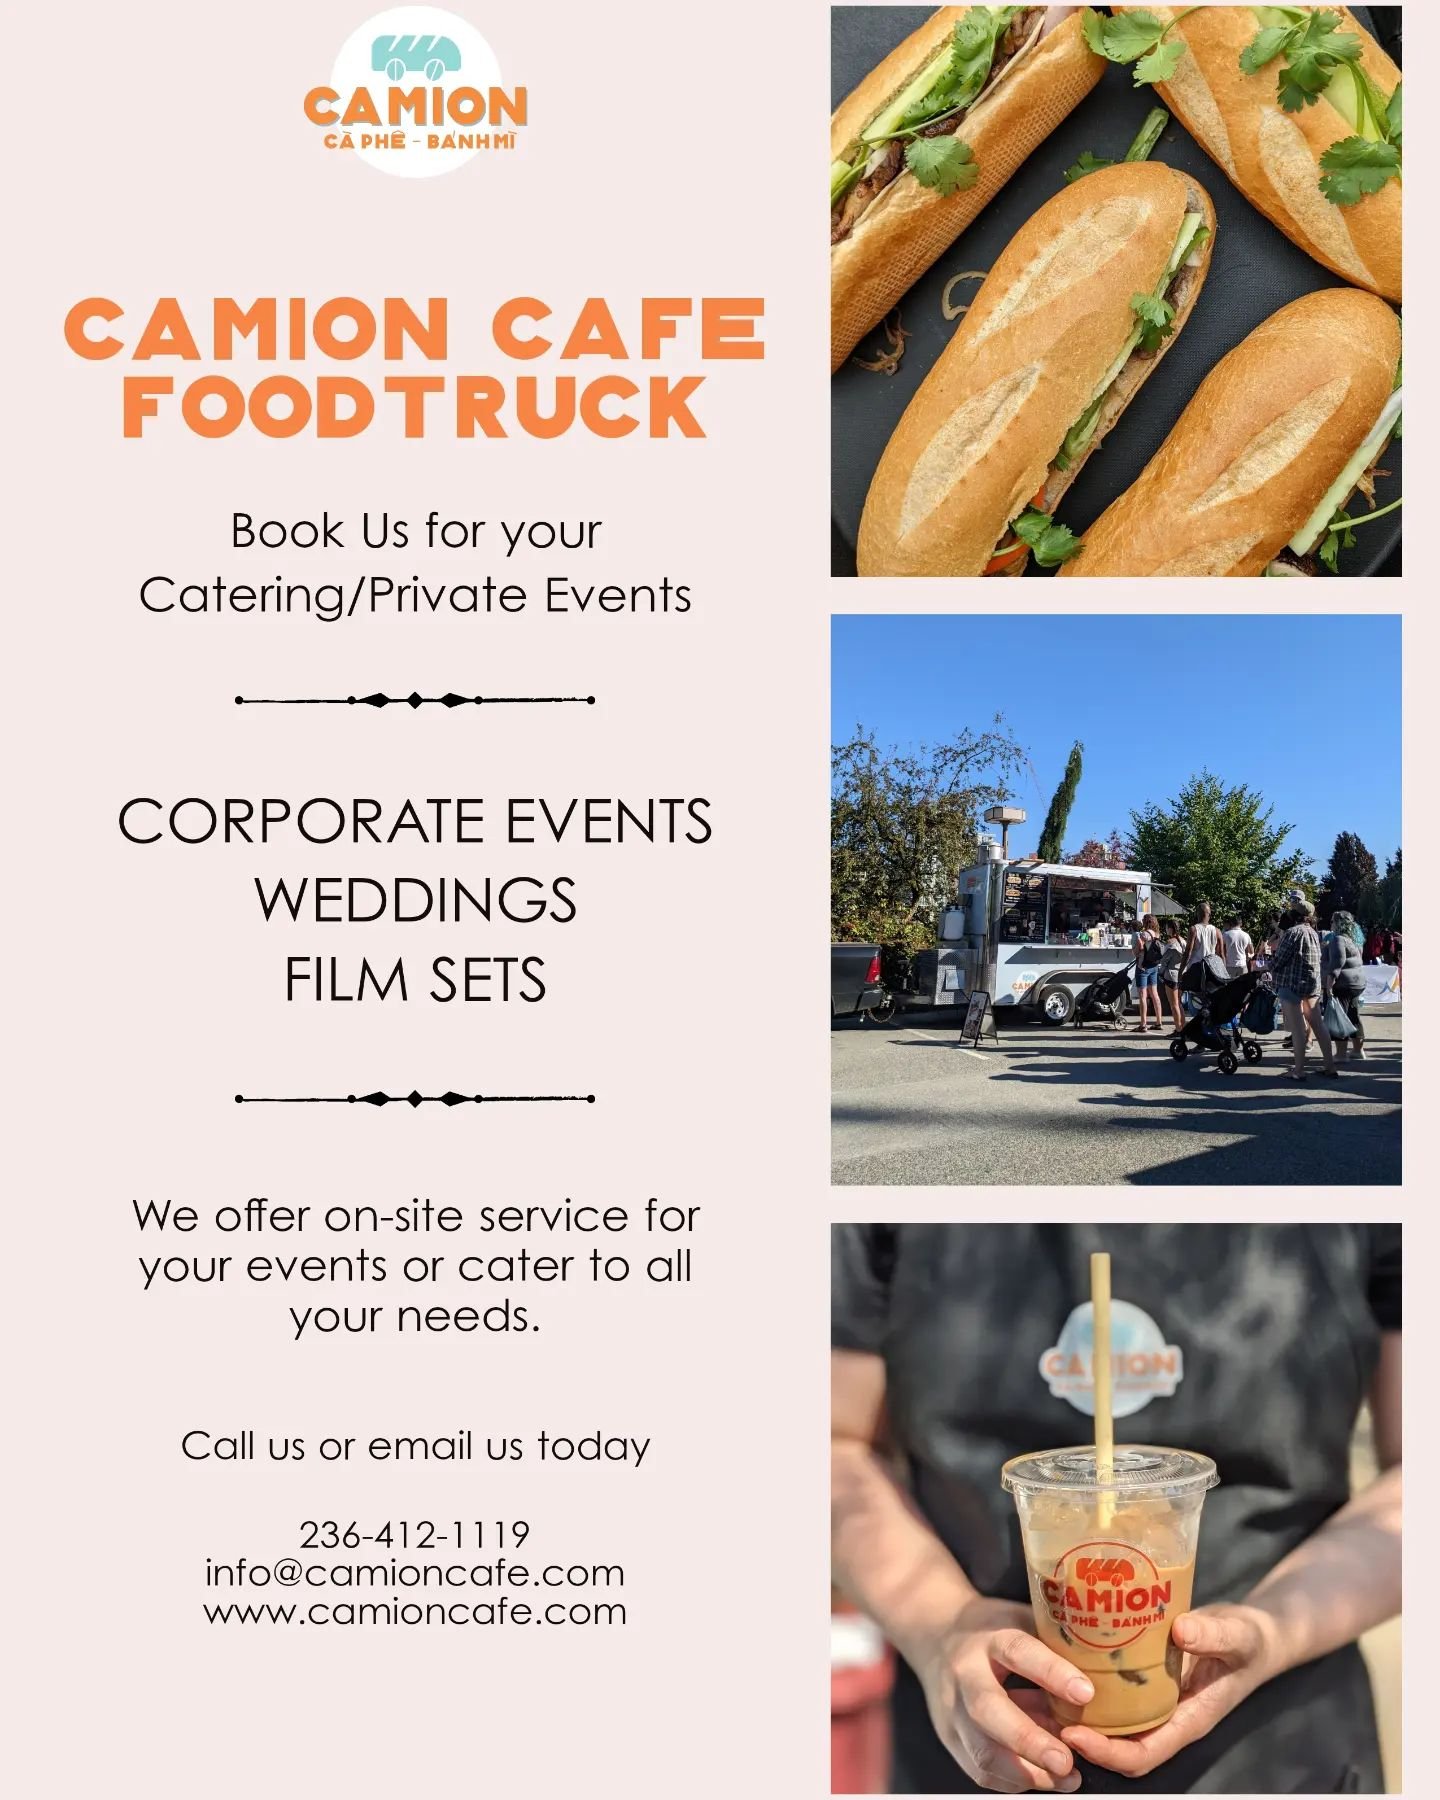 🚚🥖 Book Our Food Truck for your event Today! 🎉

Looking to add a delicious twist to your upcoming event? Look no further than our amazing food truck catering service! Our mobile kitchen on wheels brings the flavors and excitement of Vietnamese str